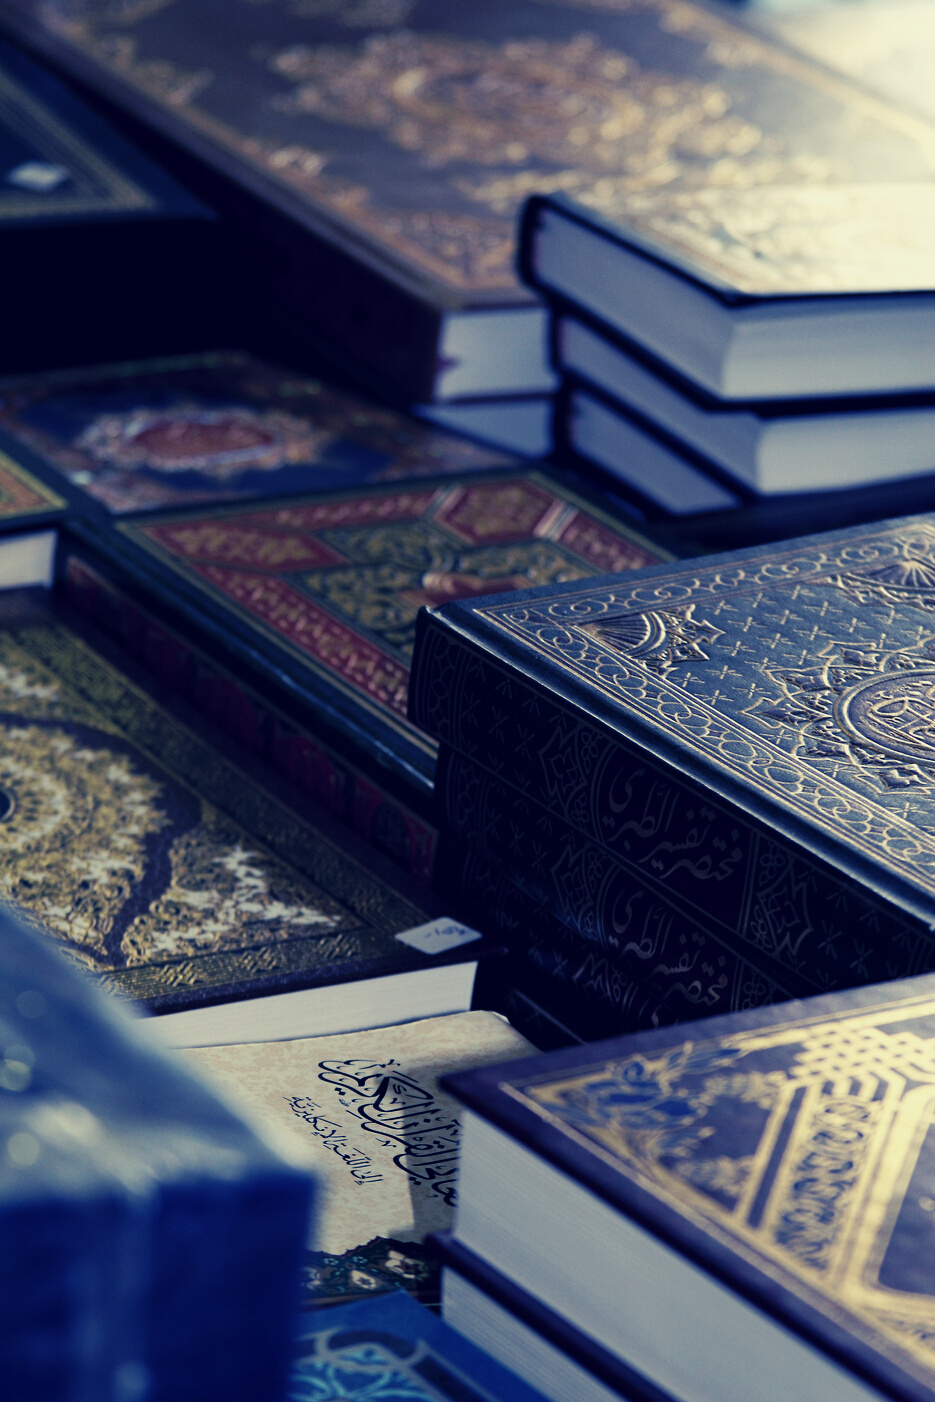 Qurans and Islamic books for sale.